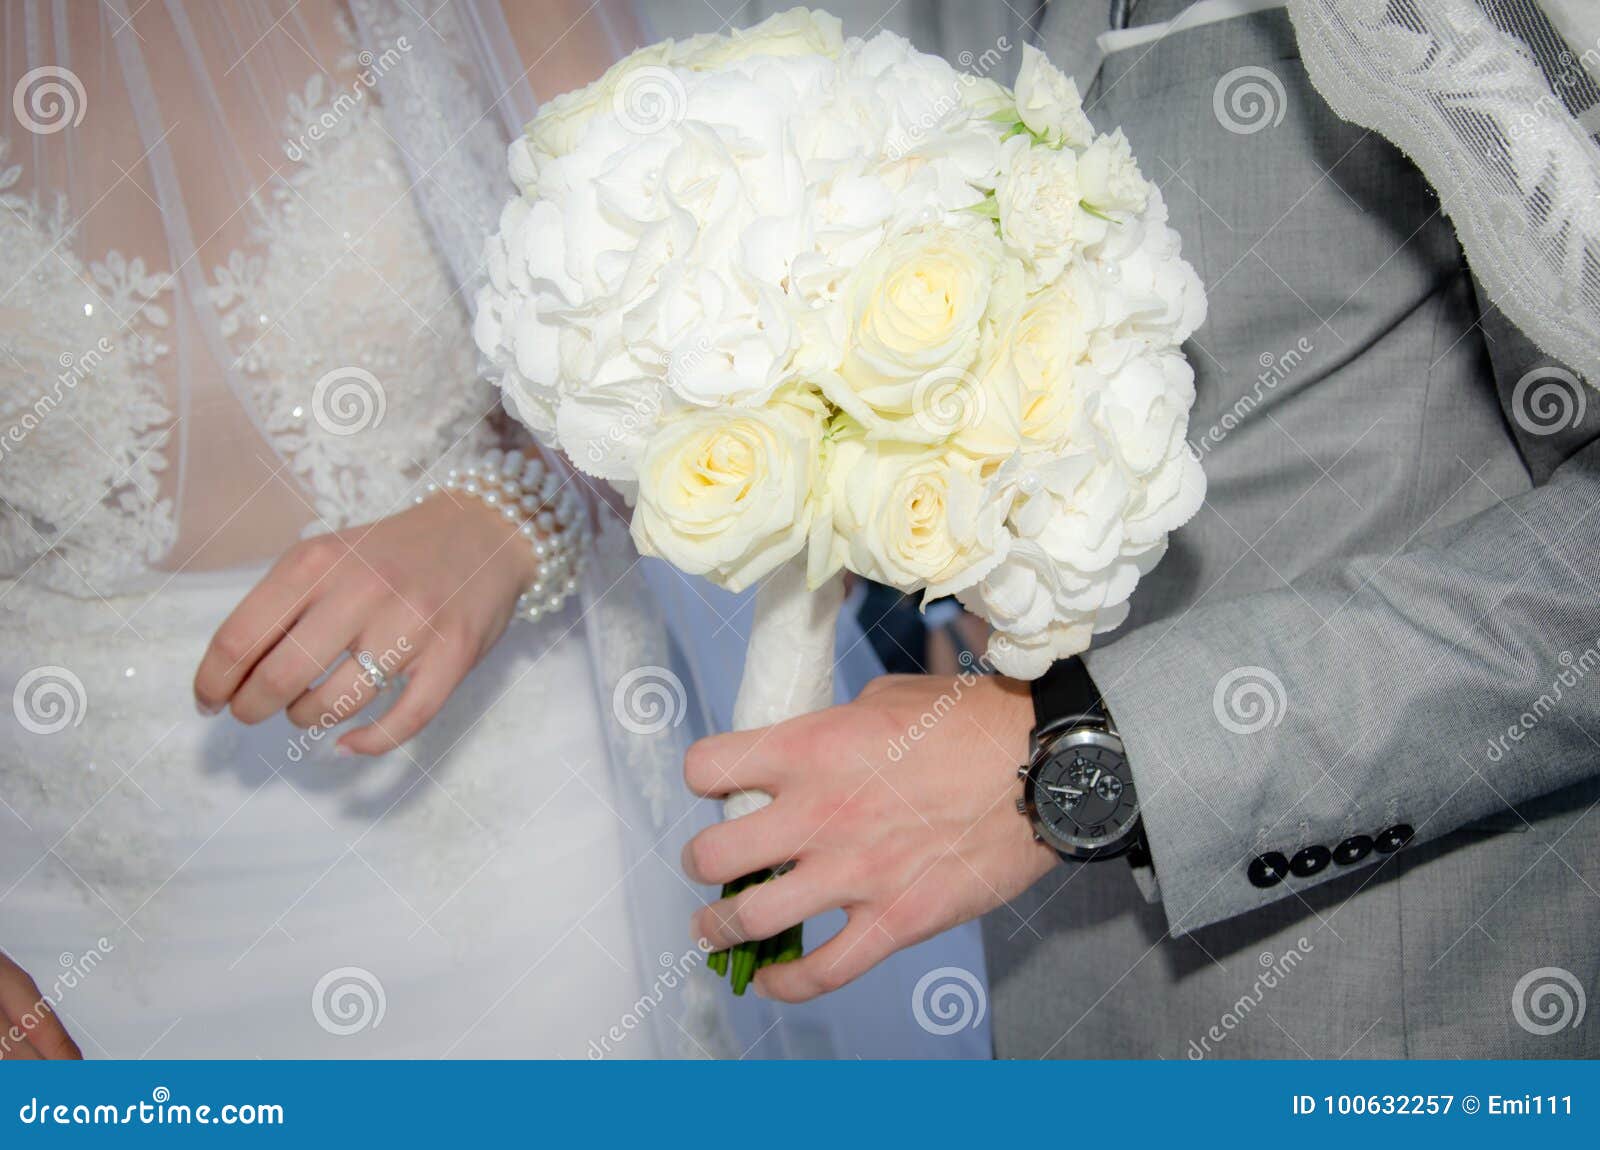 Bride and Groom Holding Bouquet of Roses Stock Image - Image of holding ...